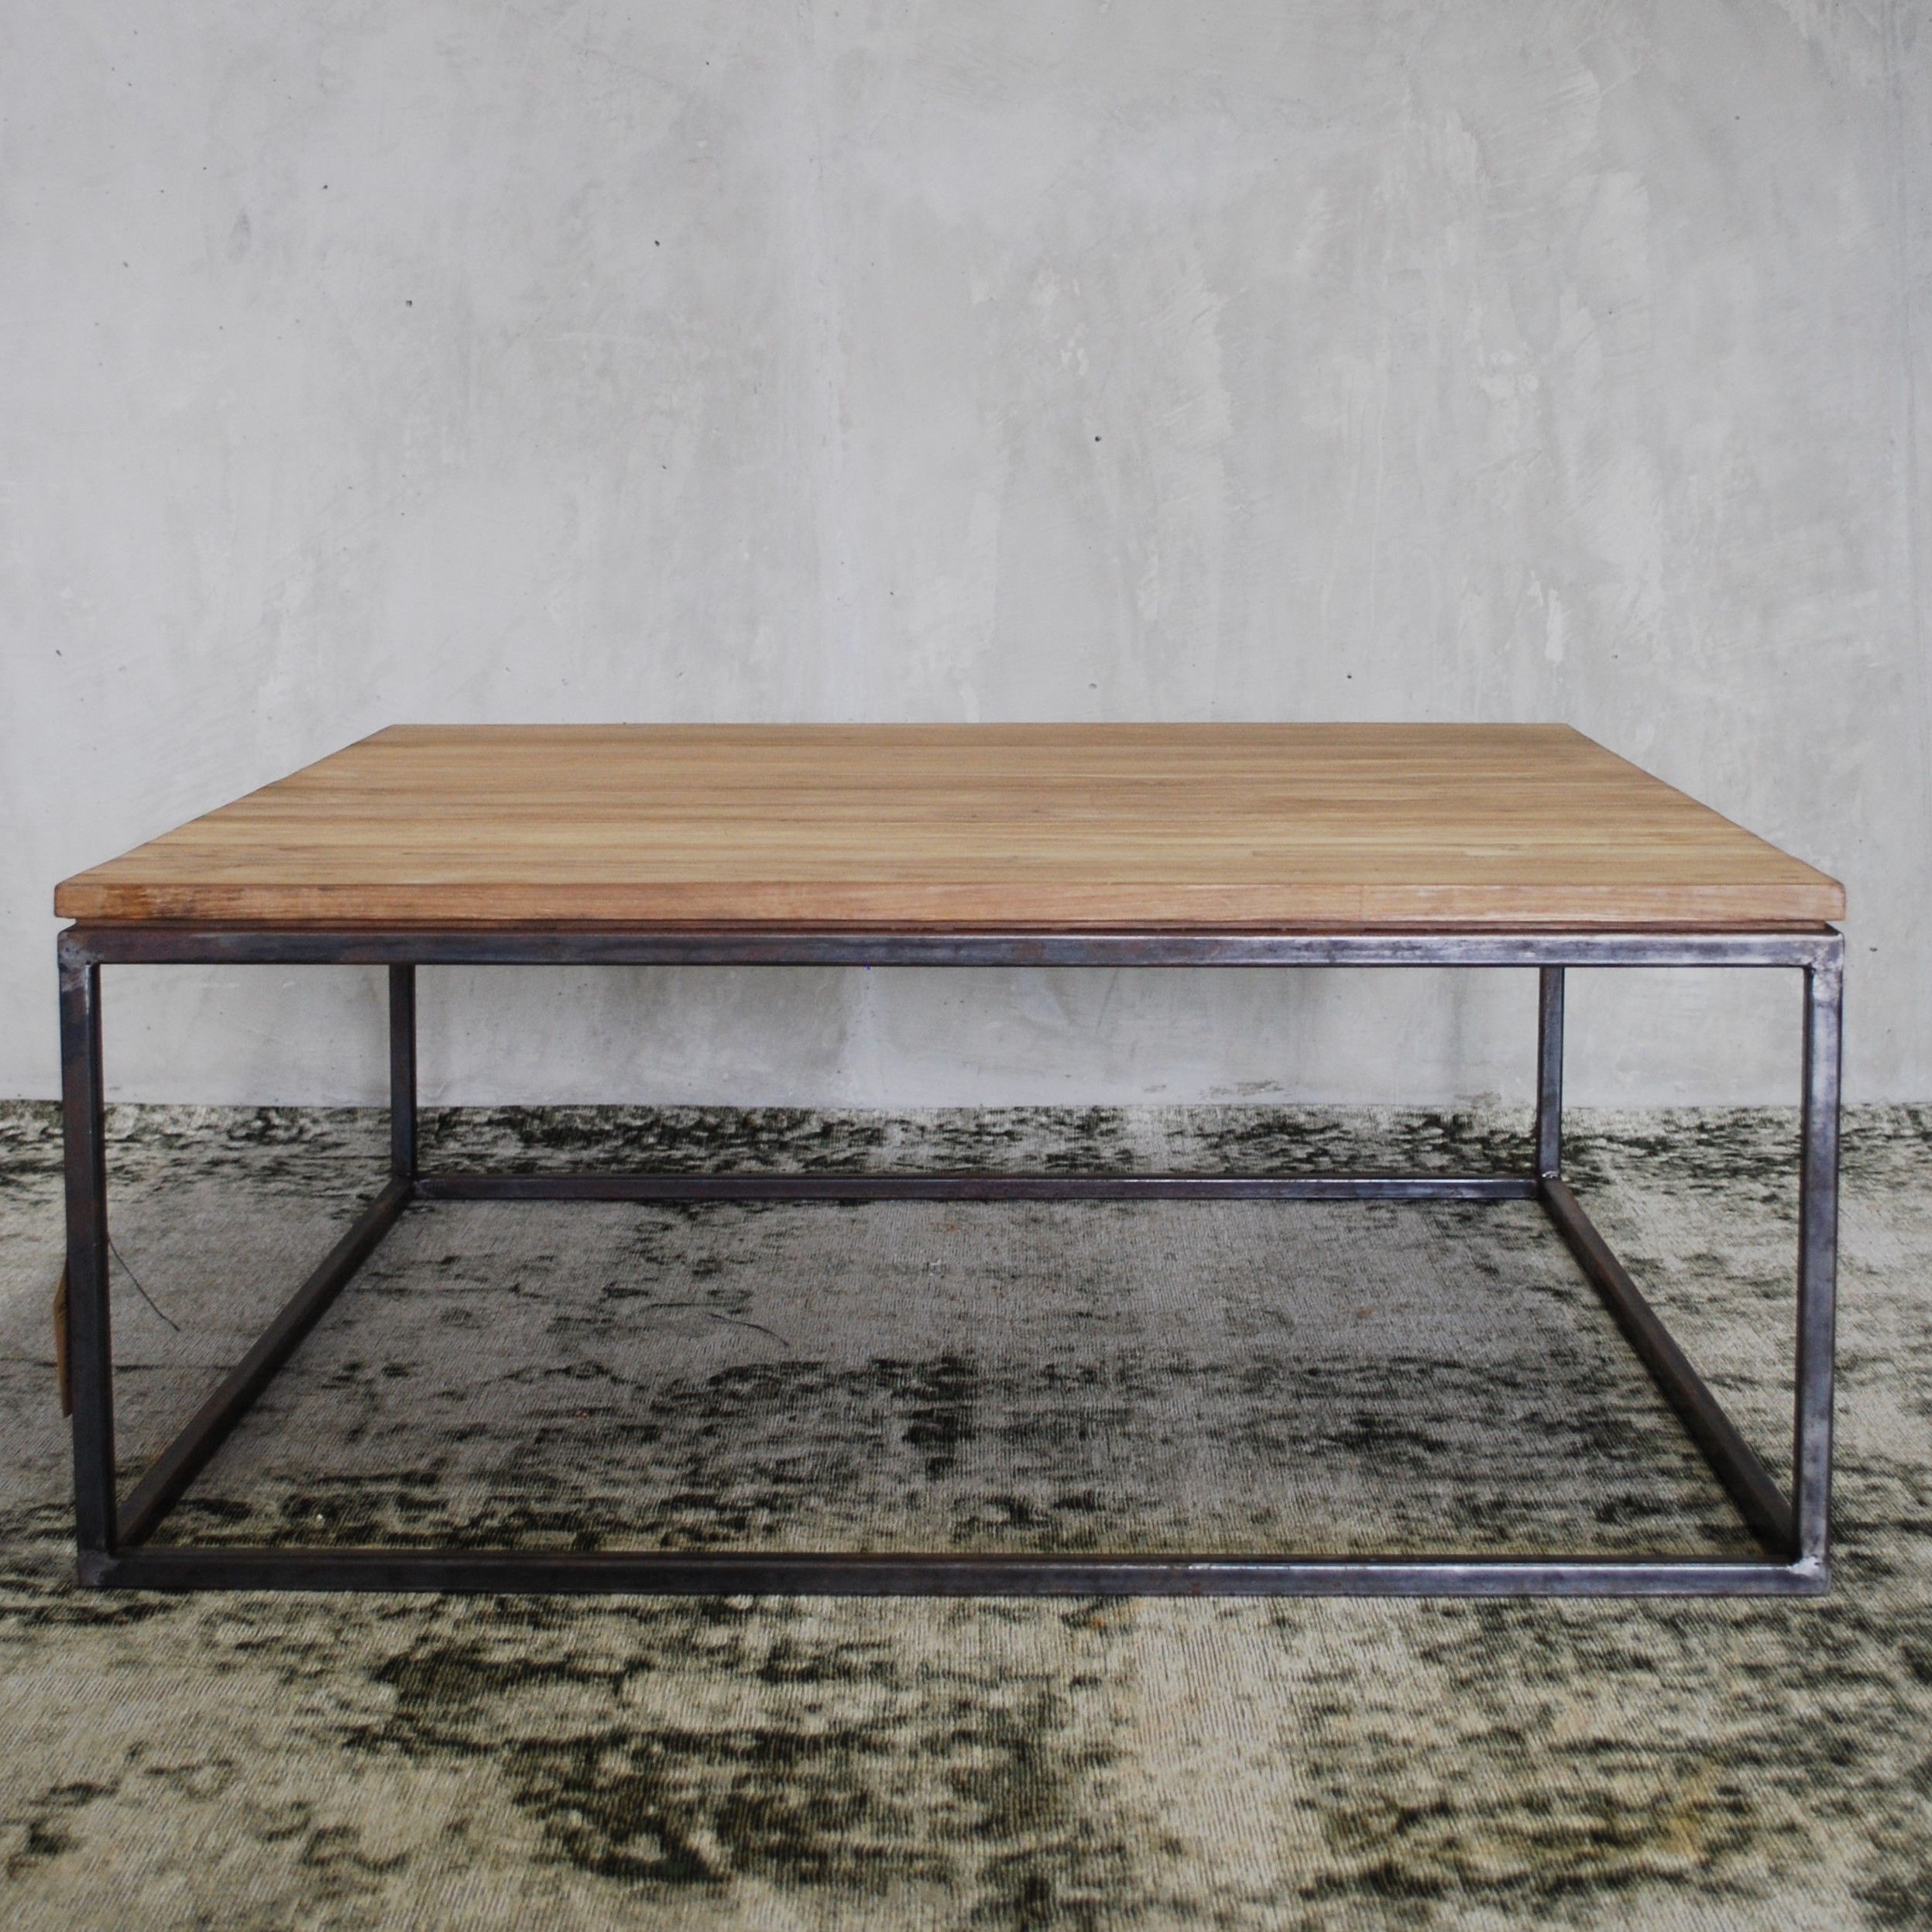 Oak Wood And Metal Legs Coffee Tables Intended For Trendy Reclaimed Teak Wood Coffee Table With Iron Leg (View 1 of 20)